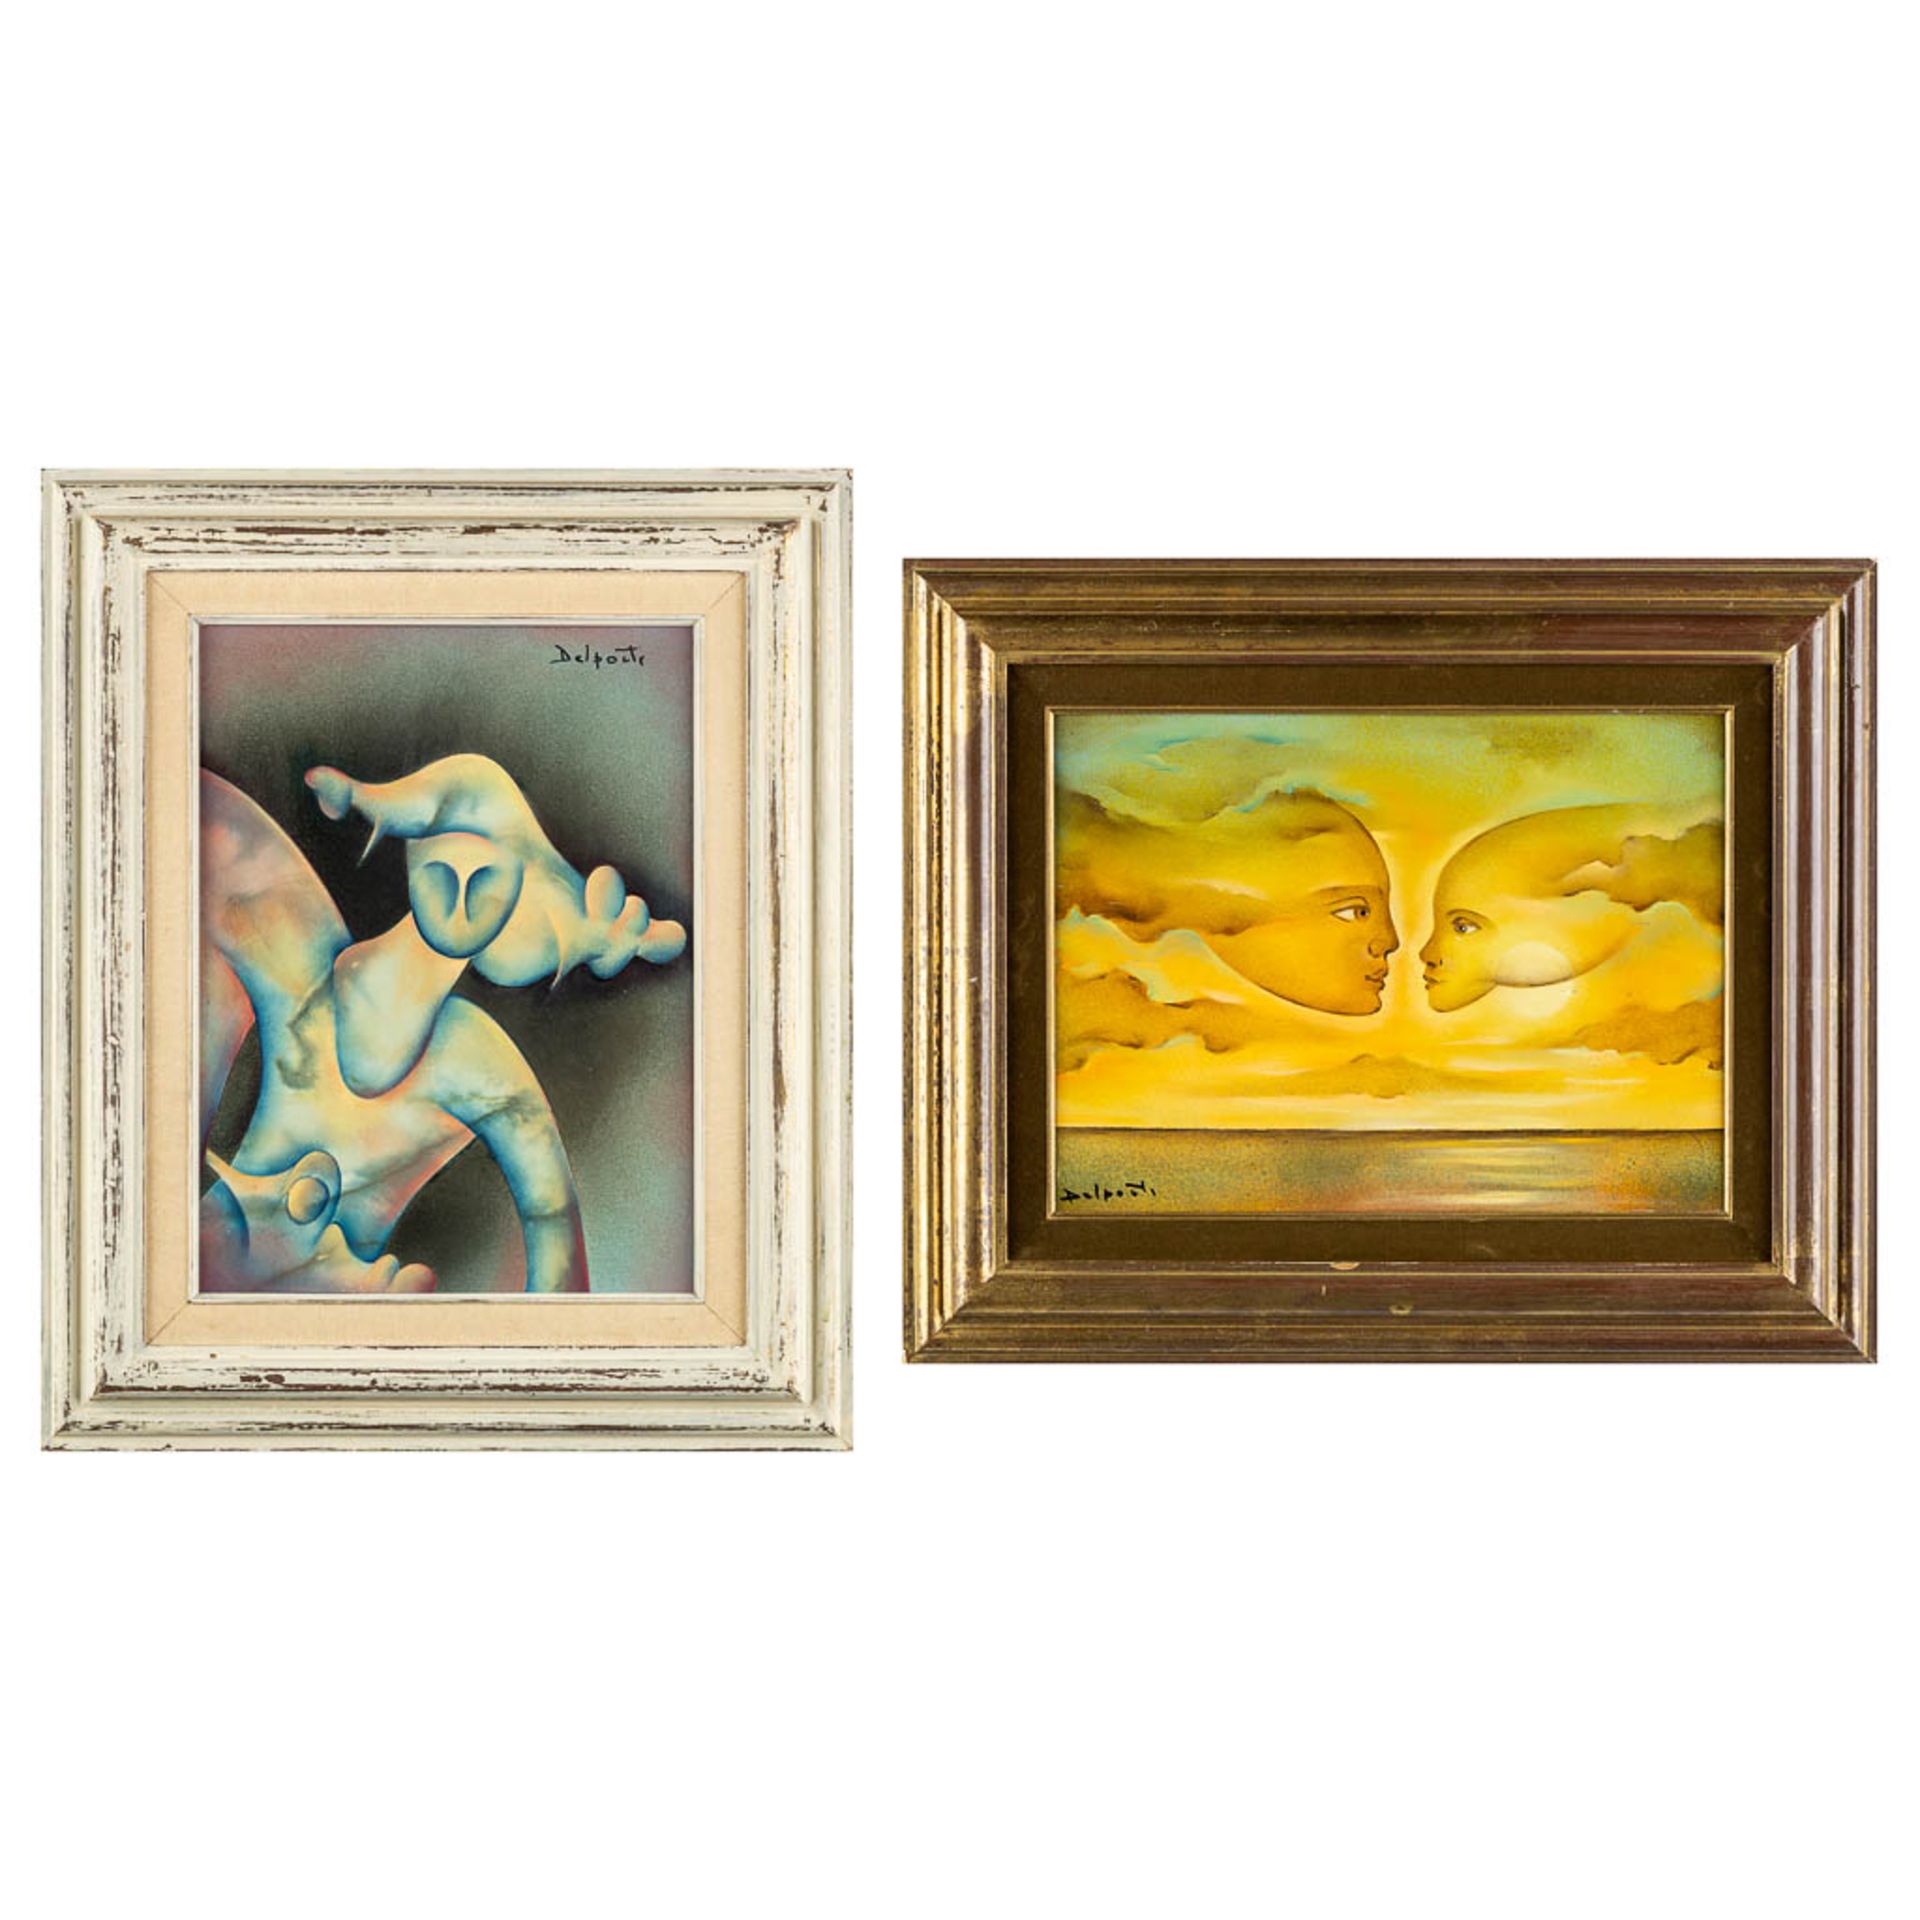 Charles DELPORTE (1928-2012) 'Two Paintings' mixed media on board/panel. (W:30 x H:30 cm)